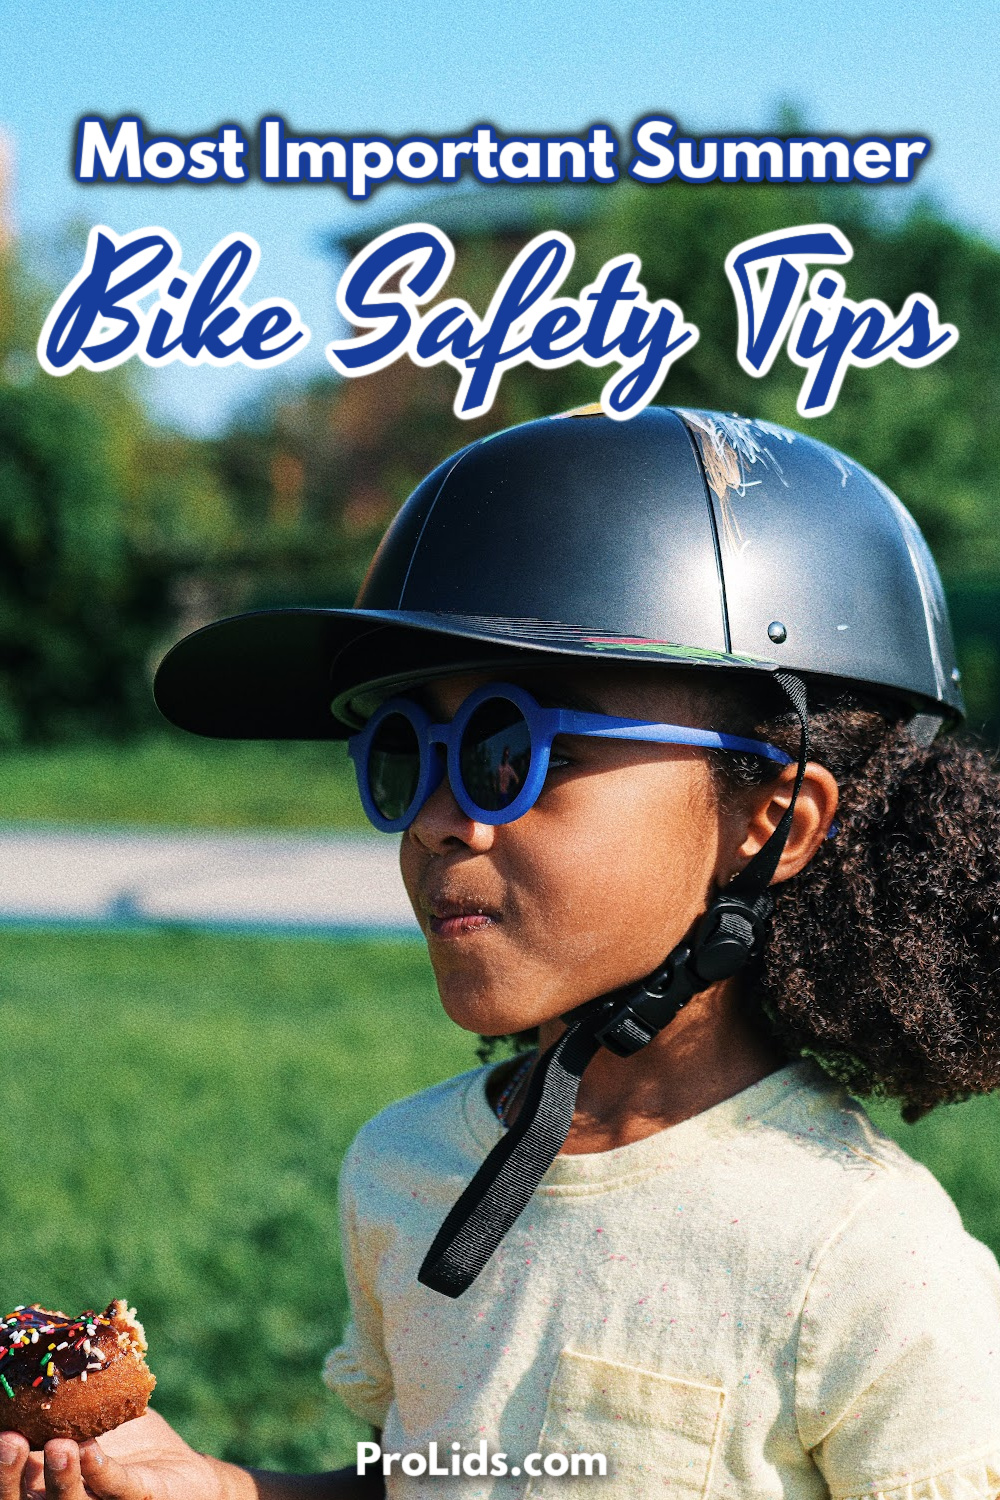 The most important summer bike safety tips can help kids enjoy their riding time while giving parents peace of mind.